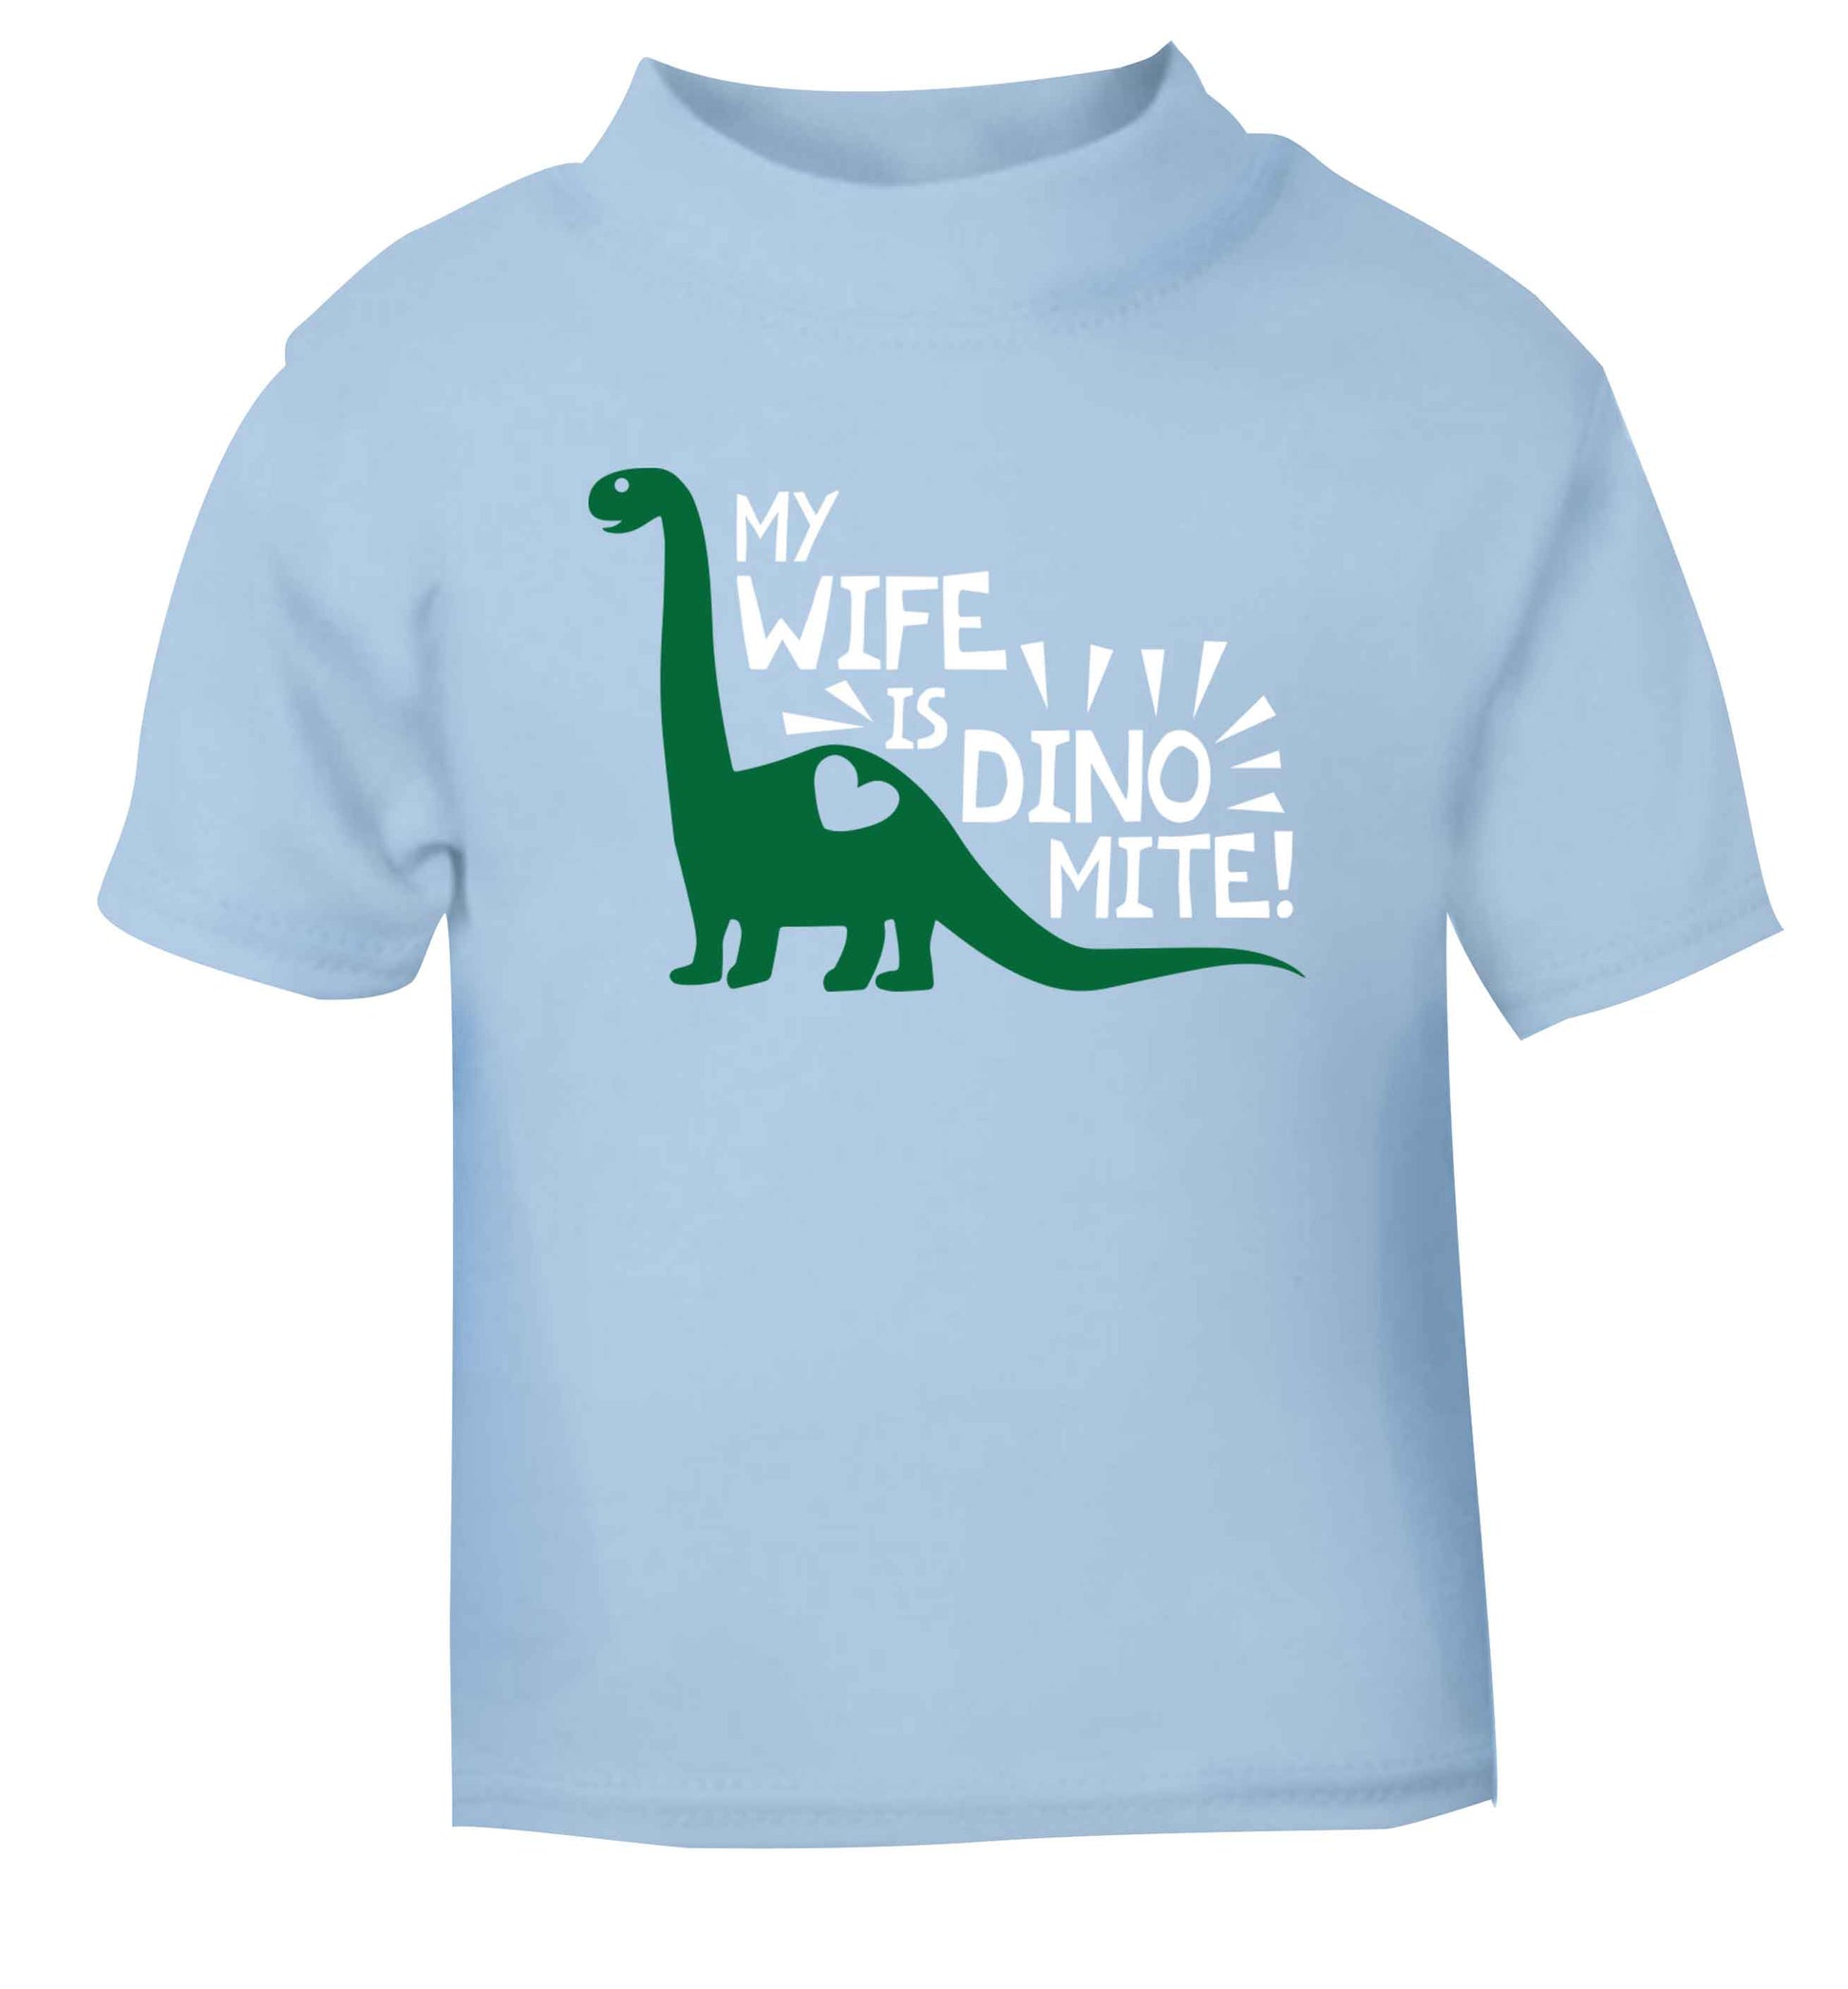 My wife is dinomite! light blue Baby Toddler Tshirt 2 Years